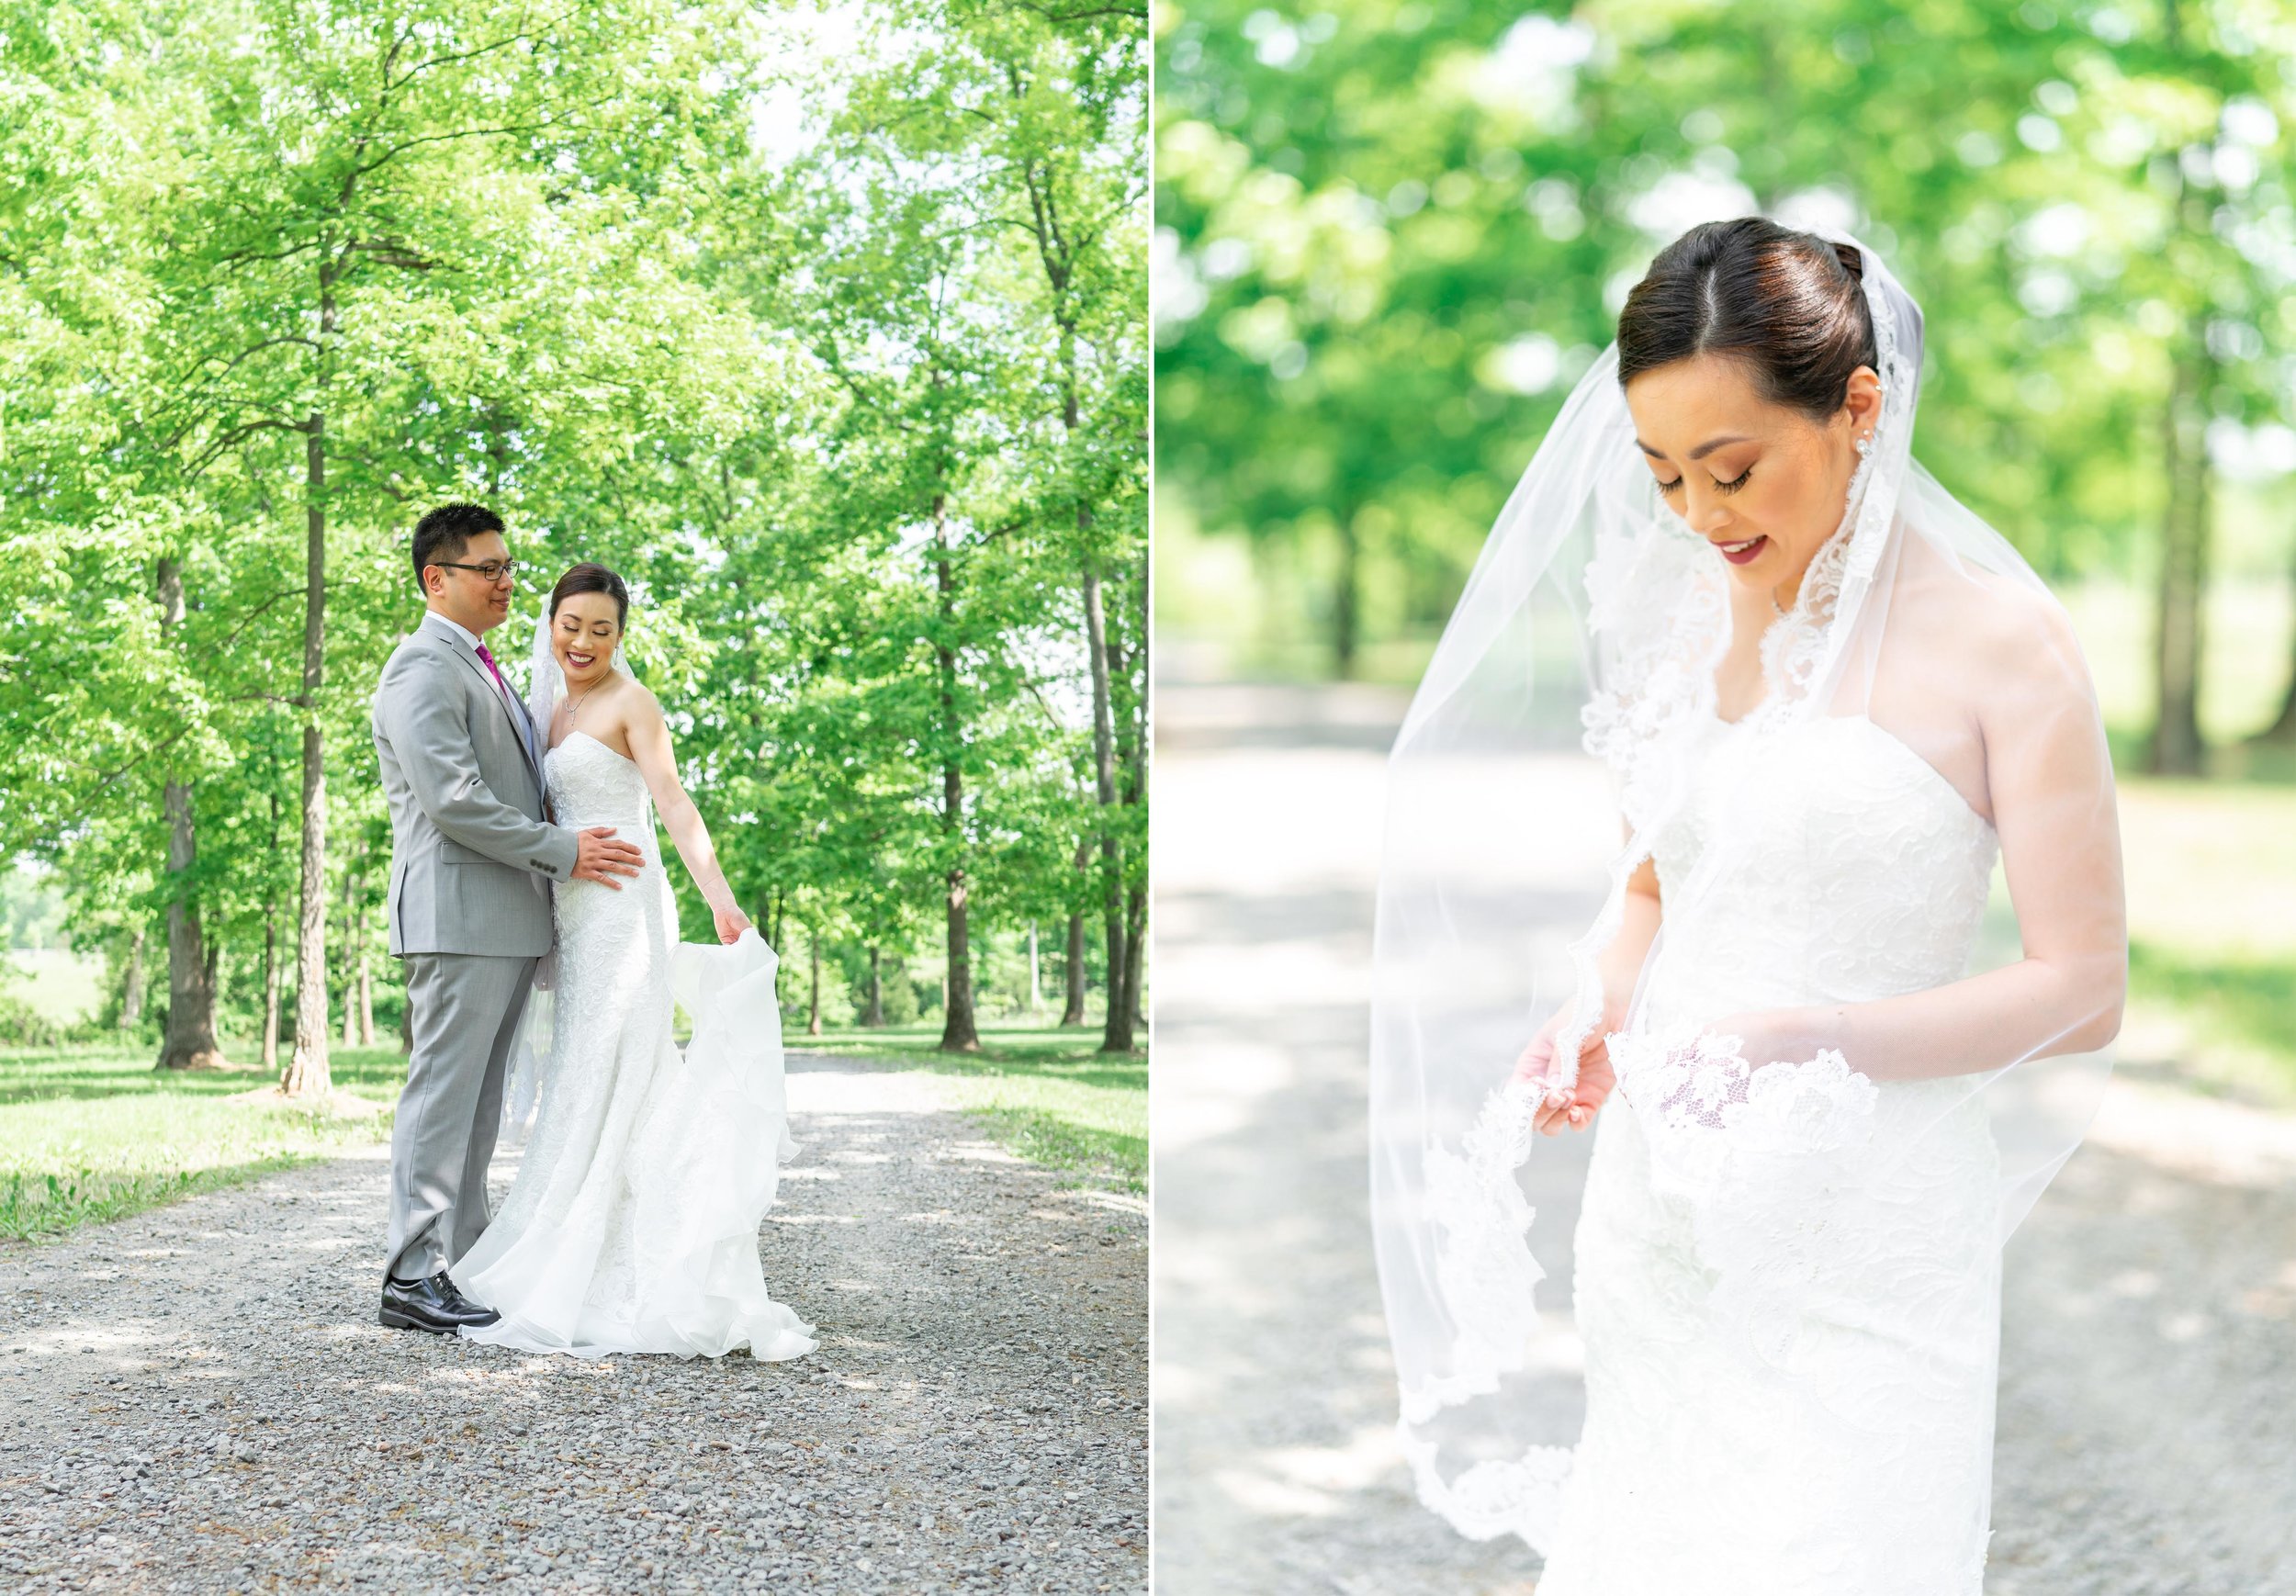 Sony a7riii (left) and Sony a9 (right) wedding photography